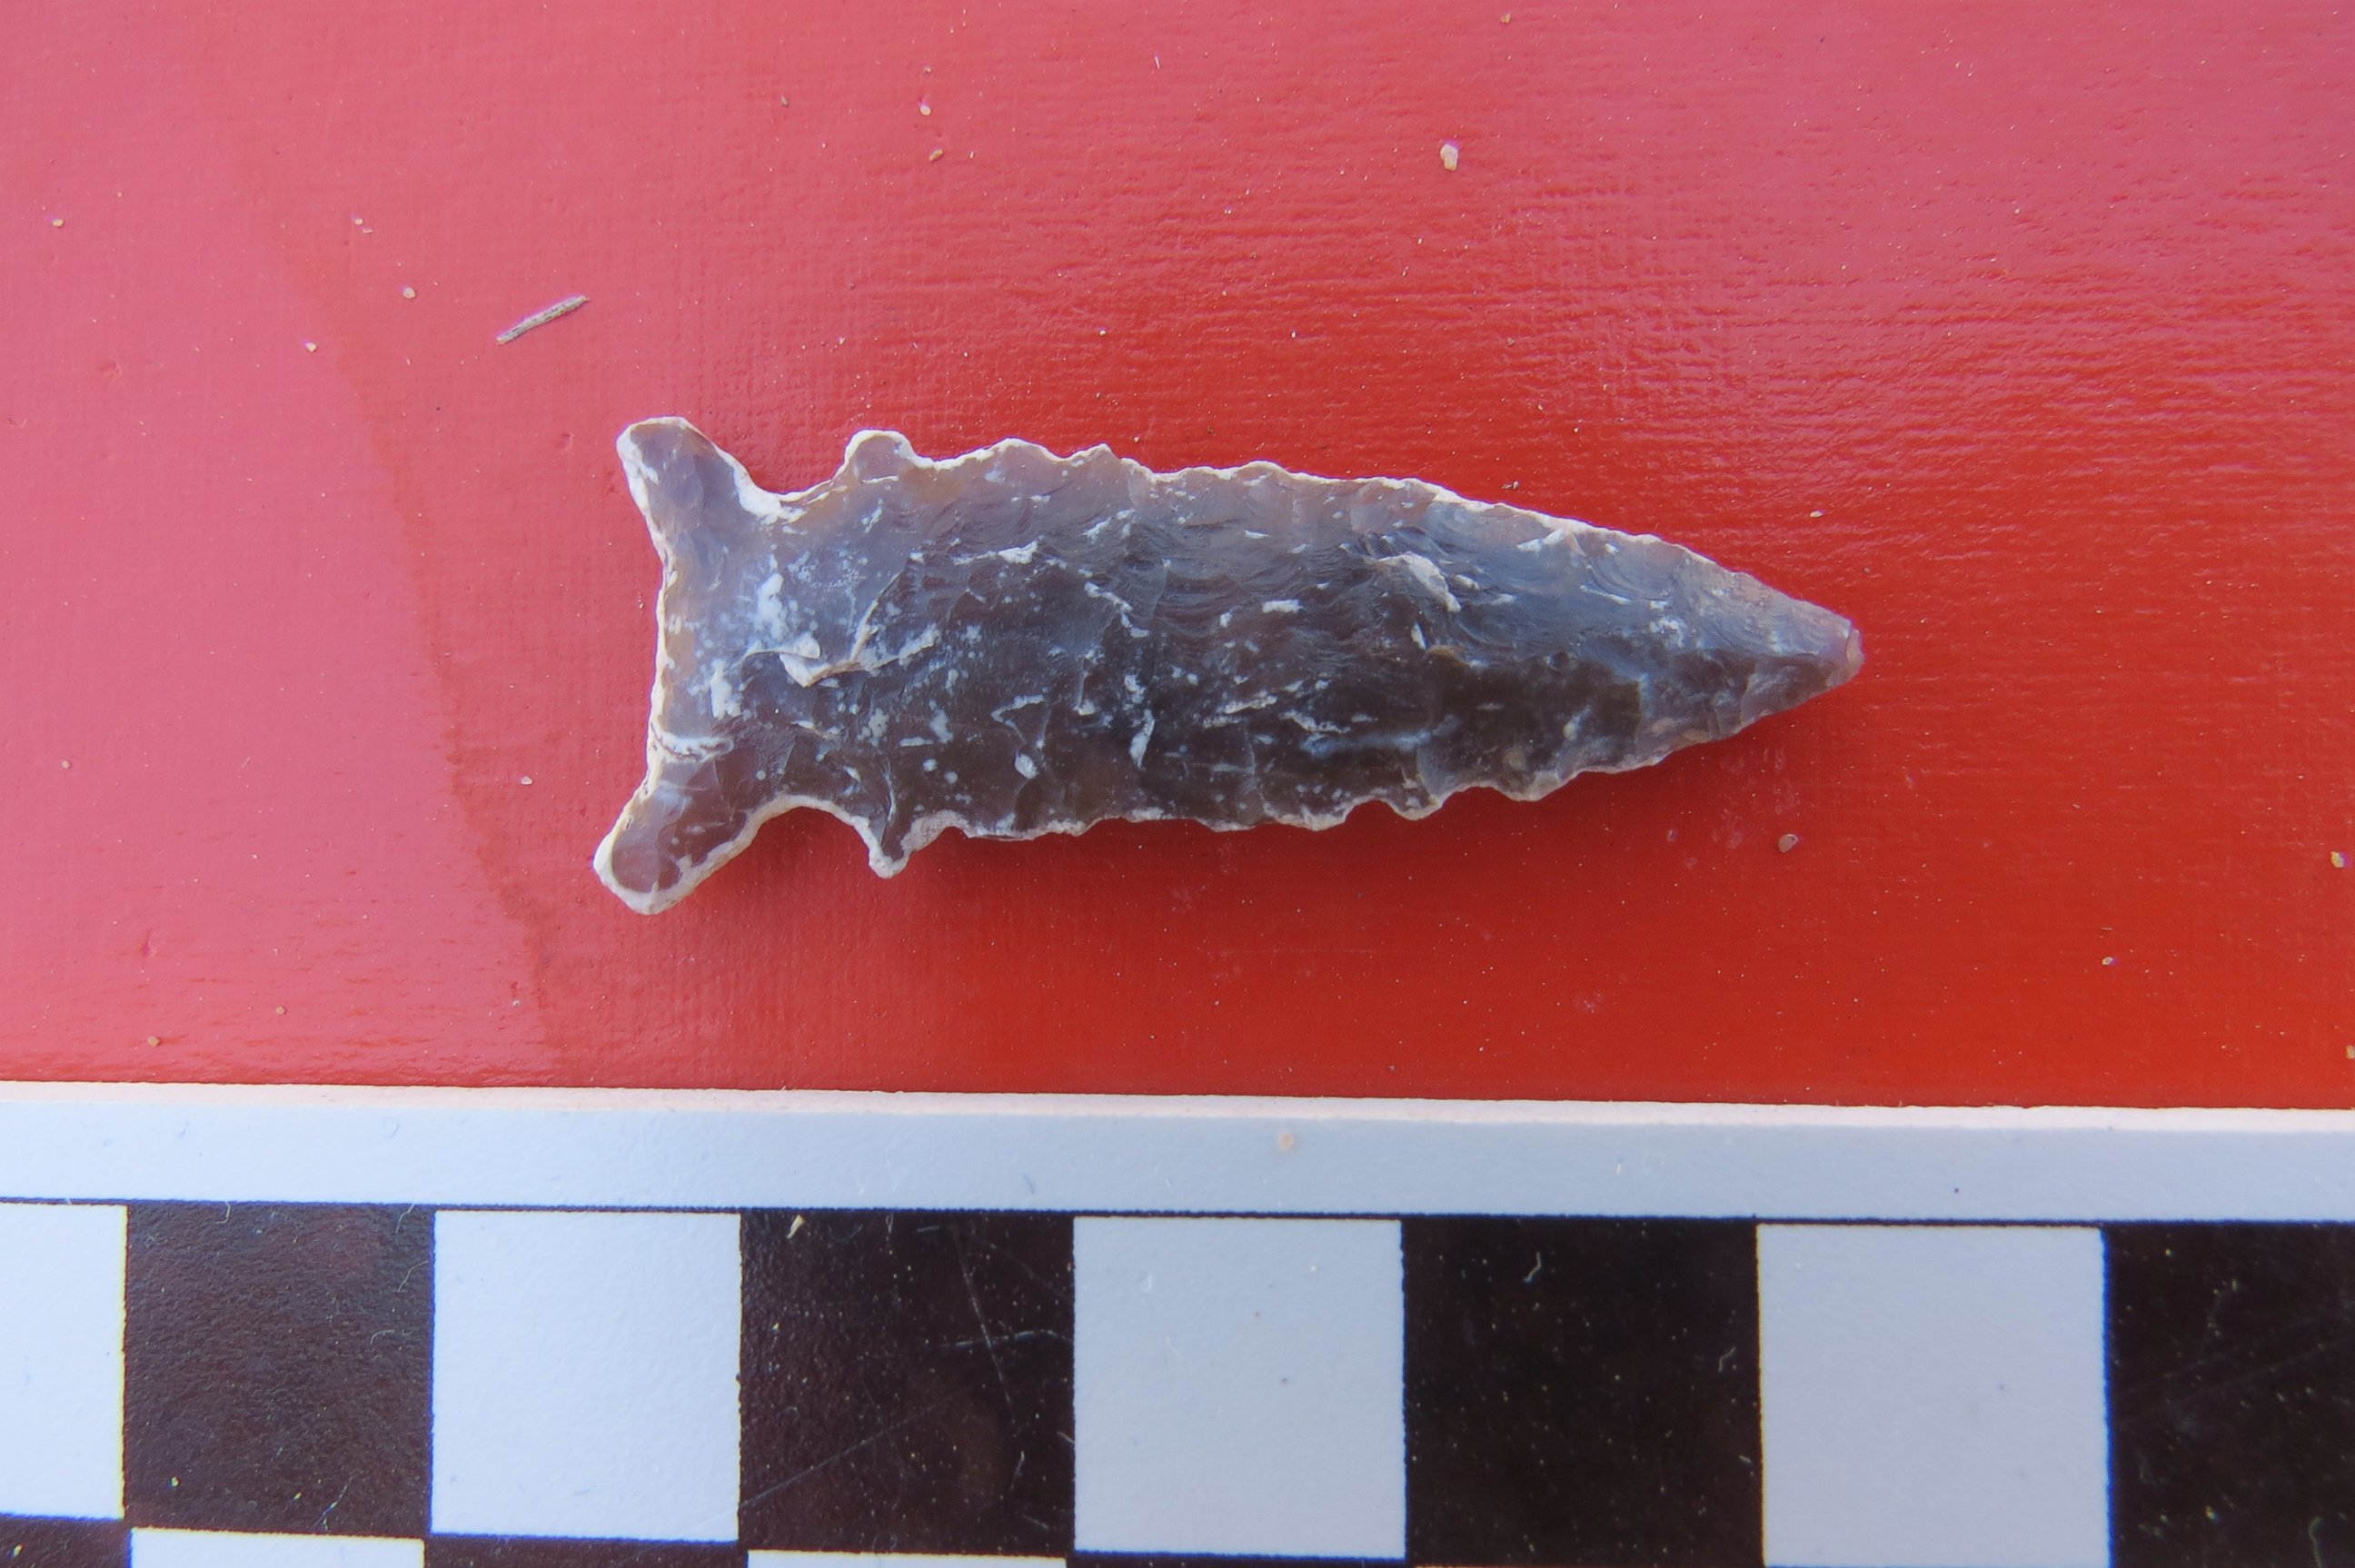 PHOTO: A projectile stone point with serrated edge is among the artifacts found at the sites.